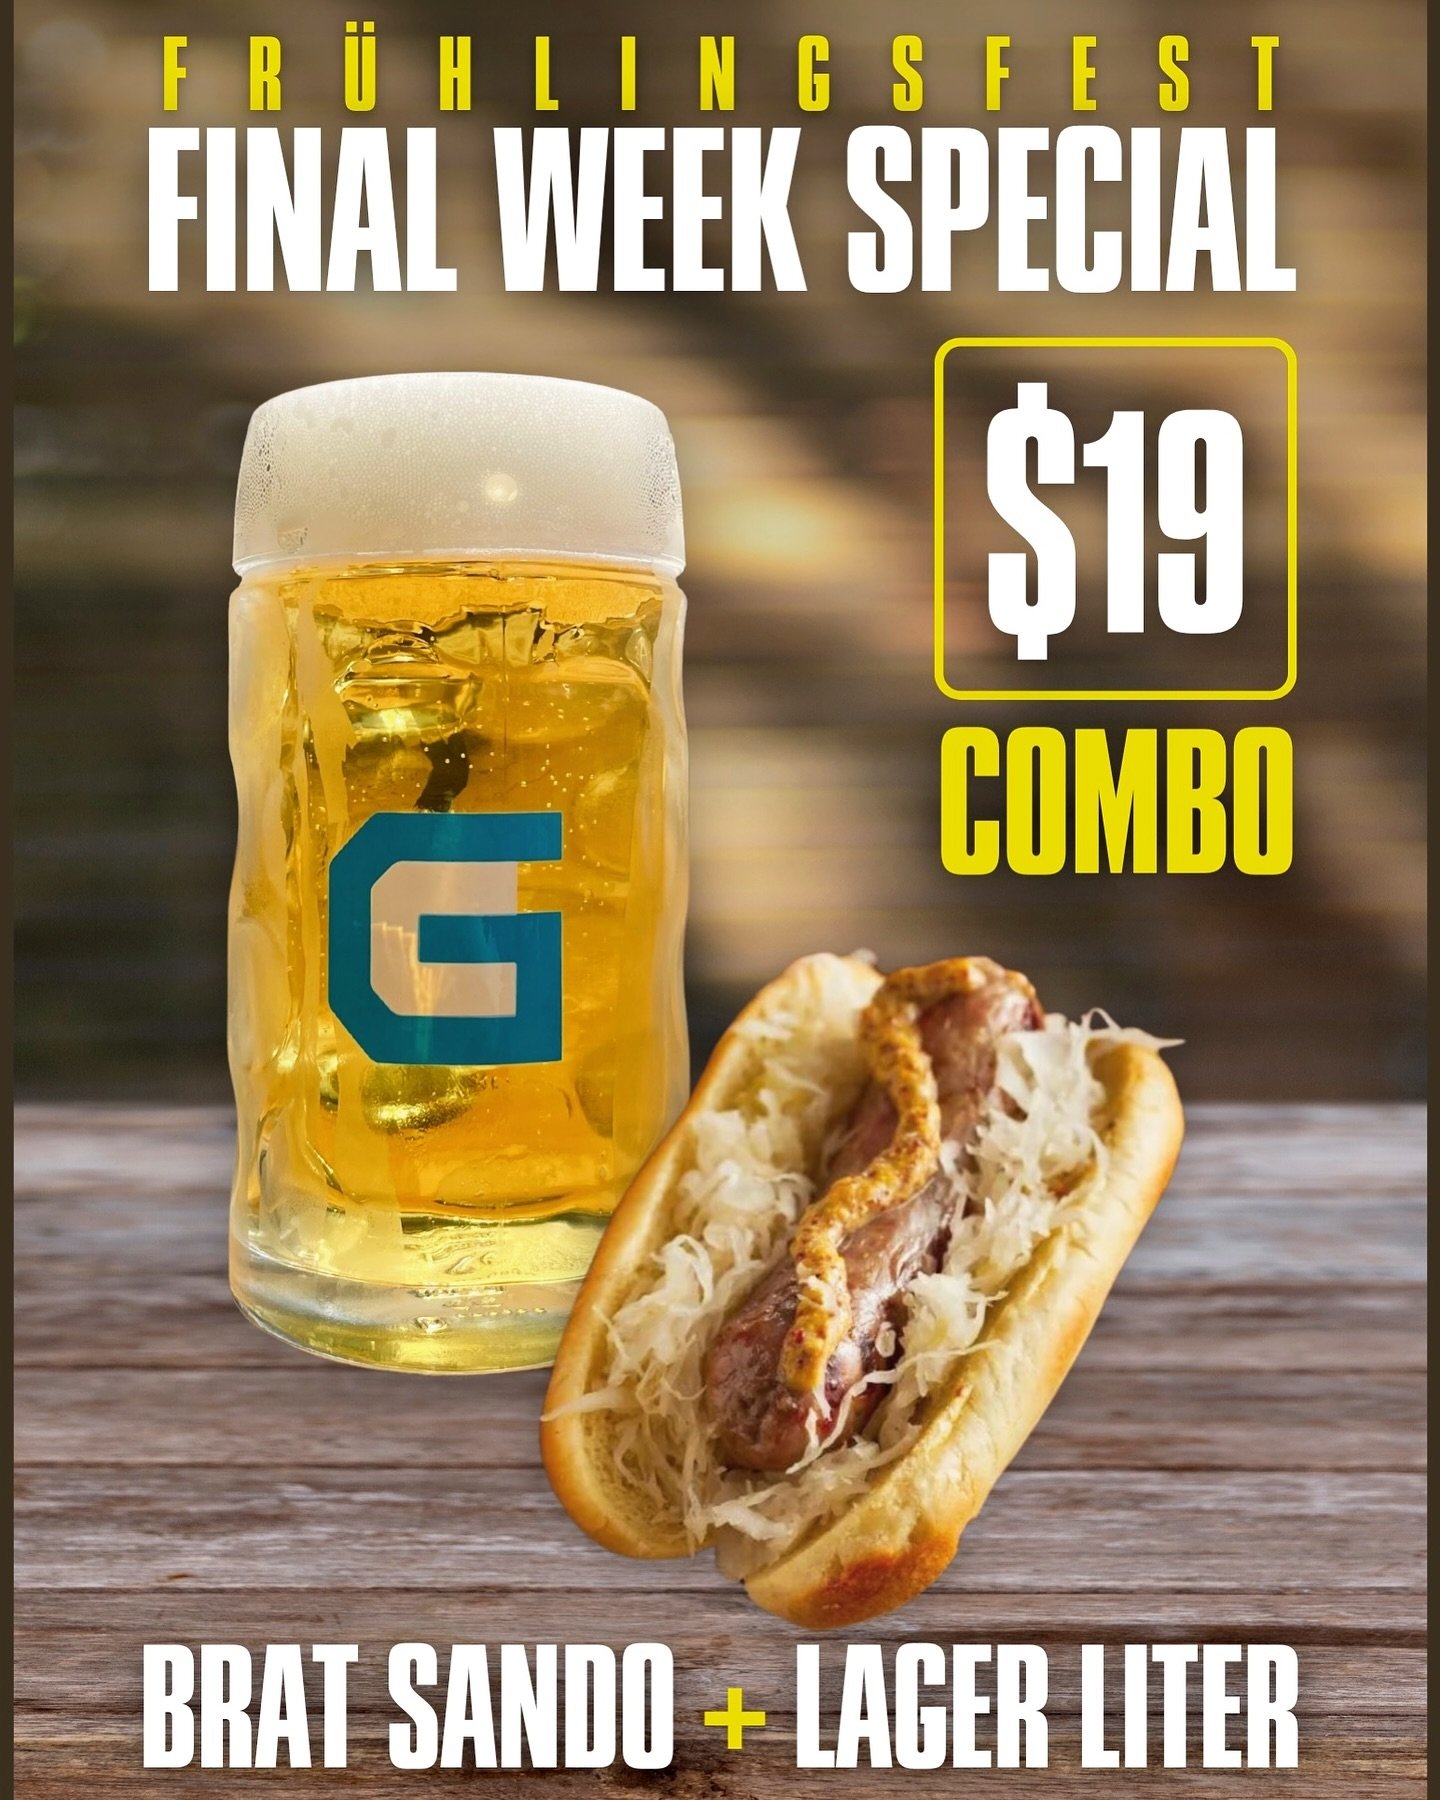 🌸🍻 Last call for Fr&uuml;hlingsfest fun! 🍻🌸

Don&rsquo;t miss out on our full tilt and half tilt specials on Liters of Lager. 

We&rsquo;re spicing things up with a mouthwatering combo deal: our hearty brat sando paired perfectly with a liter of 